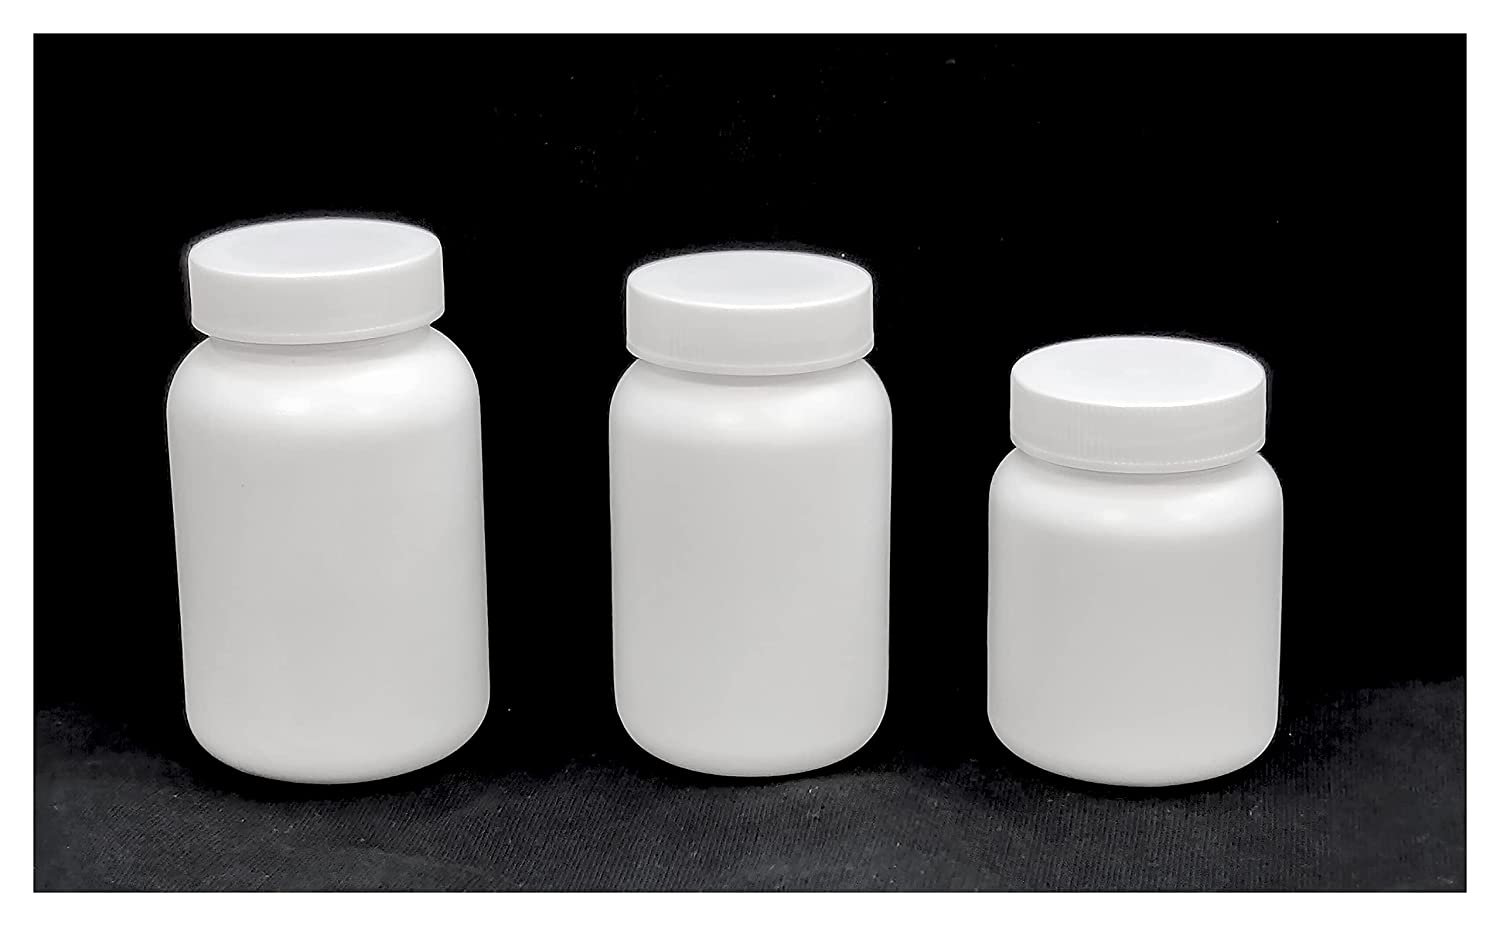 100ml White HDPE Empty Bottle for Secure Storage., Patco Pharma, Plastic Containers, 100ml-hdpe-empty-bottle-for-ayurvedic-powder-storage-capsules-tablets-store-bottle-air-tight, 100 ml bottle, 100ml Capacity, 100ml empty bottle, 100ml HDPE Bottle Ayurvedic Powder, 100ml Liquid Capacity, 100ml Packaging Solution, EMPTY BOTTLE, medicine bottle, Multipurpose 100ml Container, Plastic Containers, white container, Patco Pharma